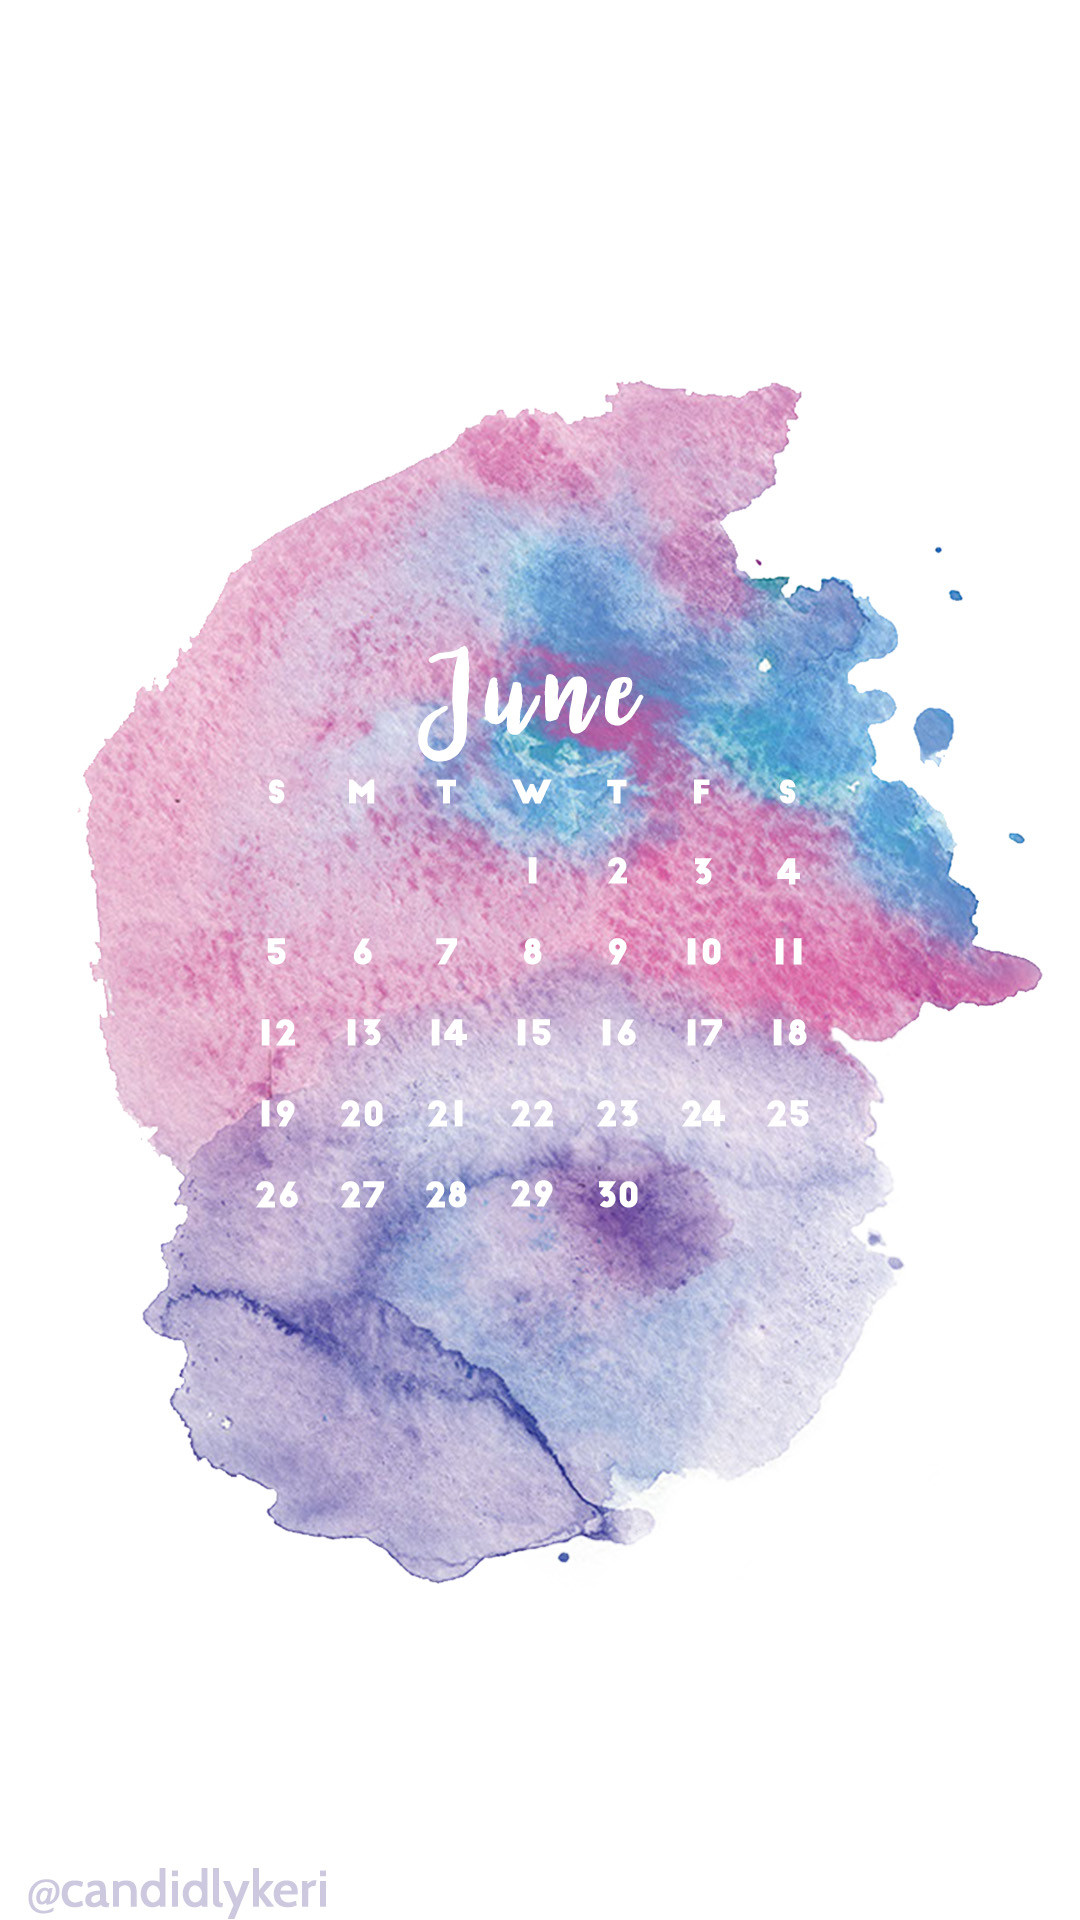 Blue purple pink watercolor June 2016 calendar wallpaper free download for iPhone android or desktop background